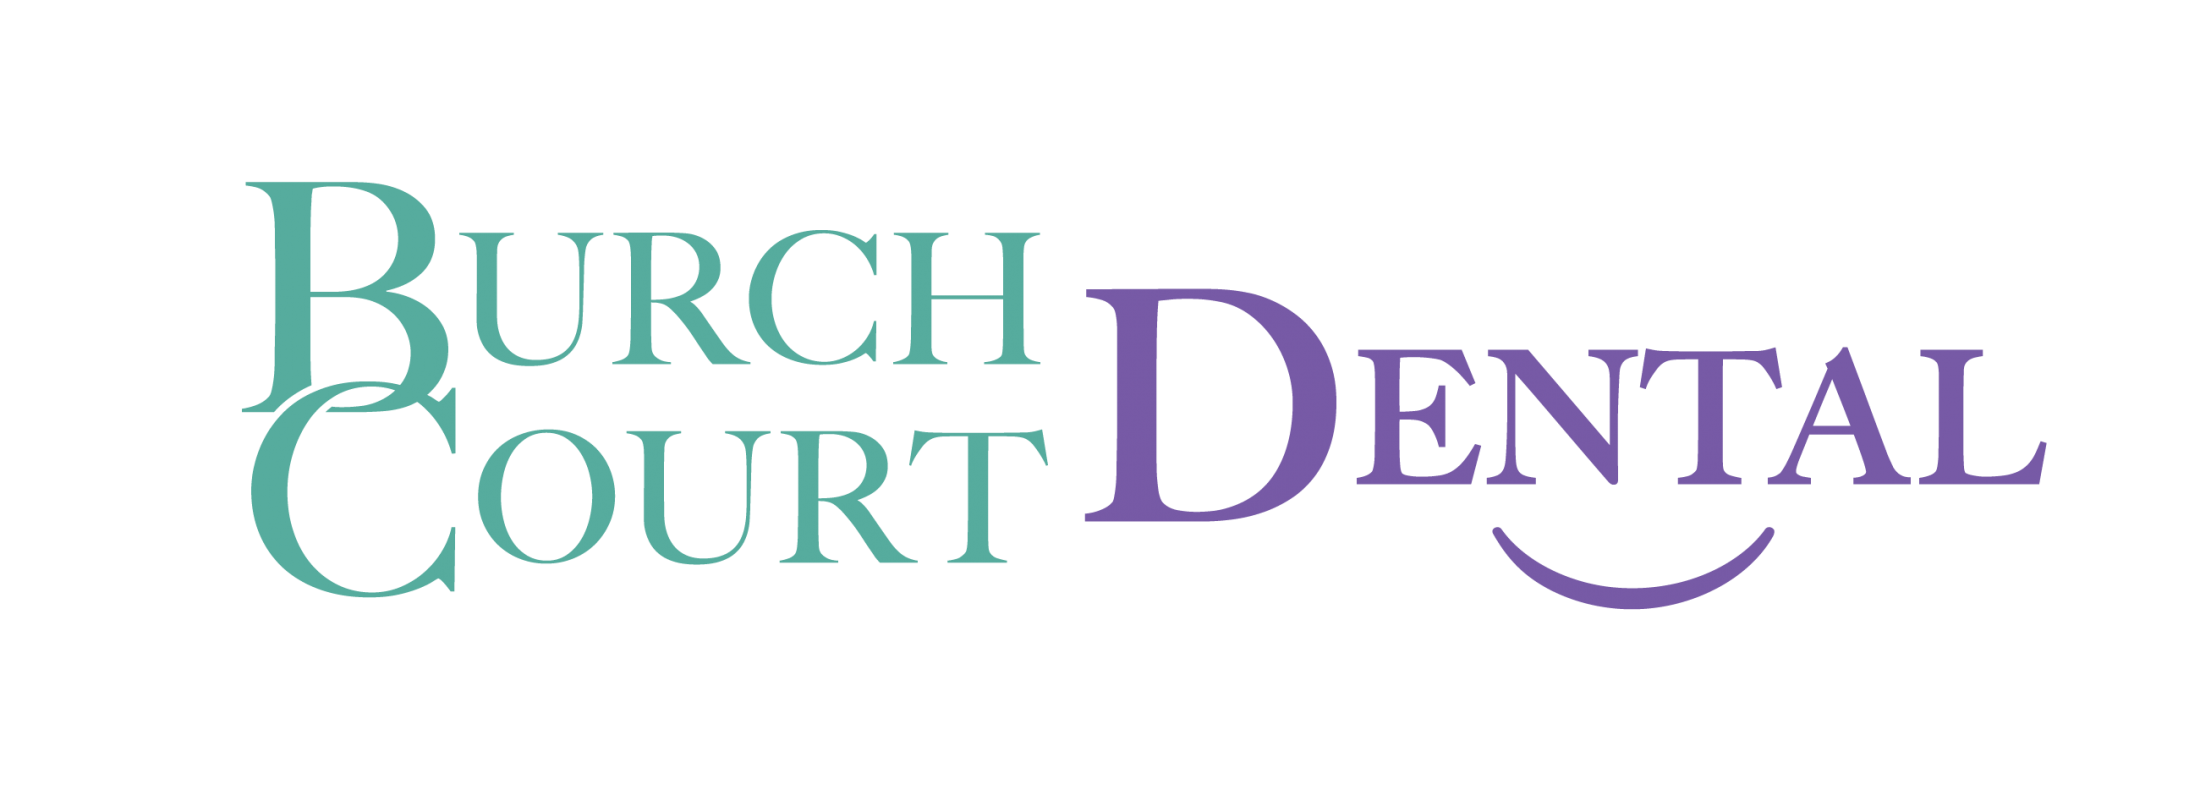 Link to Burch Court Dental home page